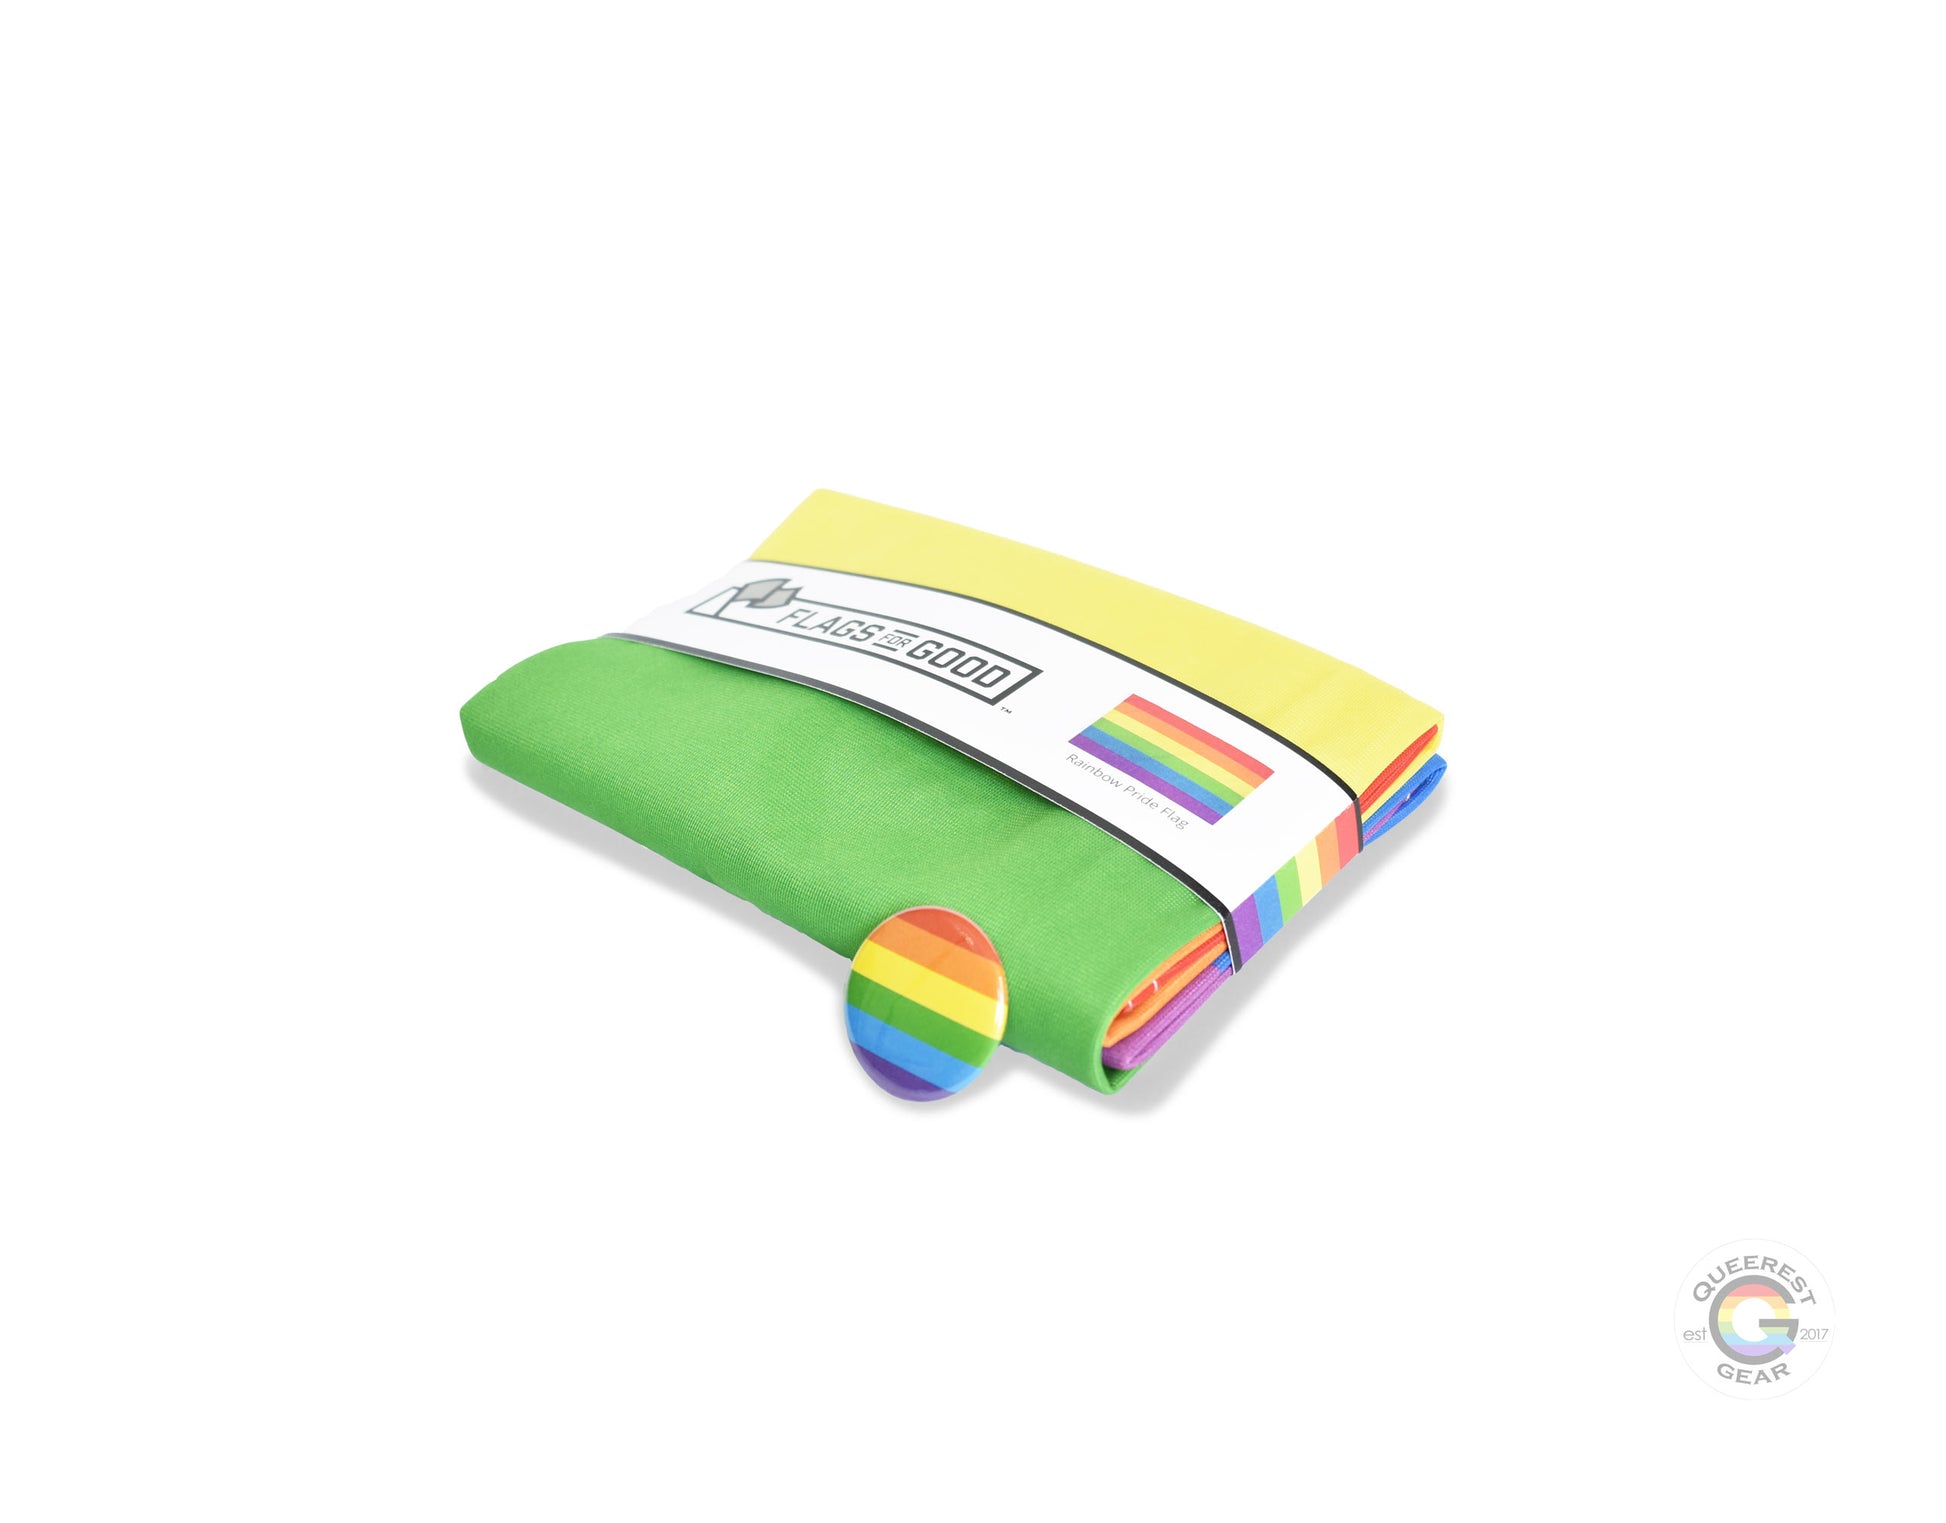  The rainbow pride flag folded in its packaging with the matching free rainbow flag button